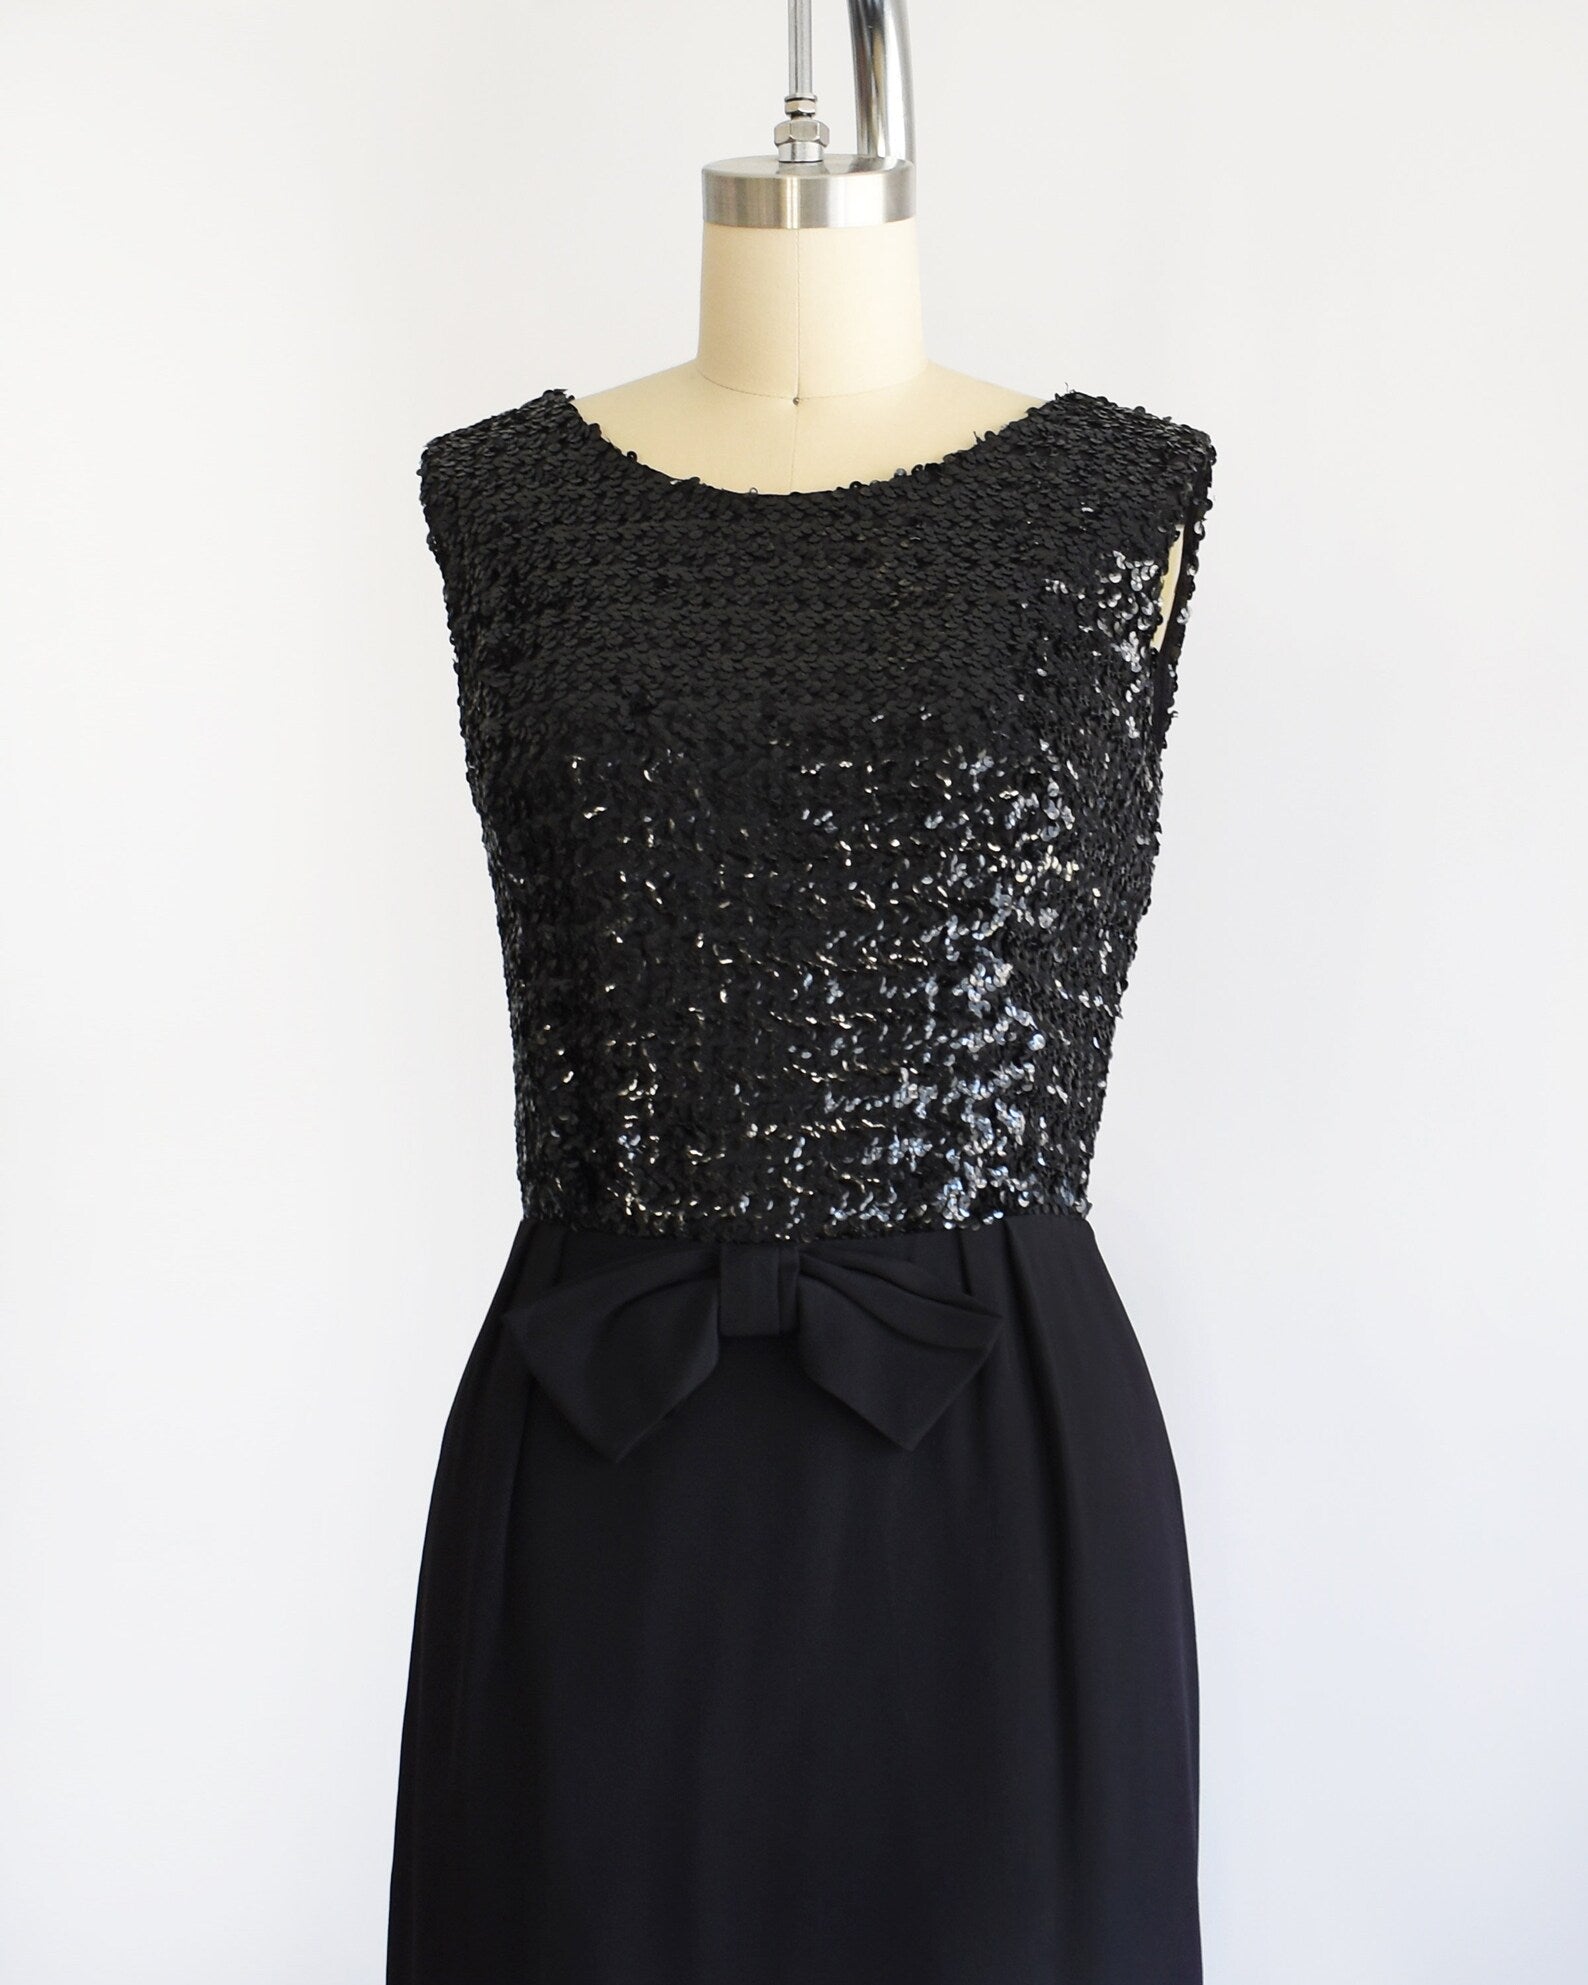 Side front view of a vintage late 50s early 60s black dress that has a black sequin bodice, a bow at the waist, and a pencil skirt. The dress is modeled on a dress form